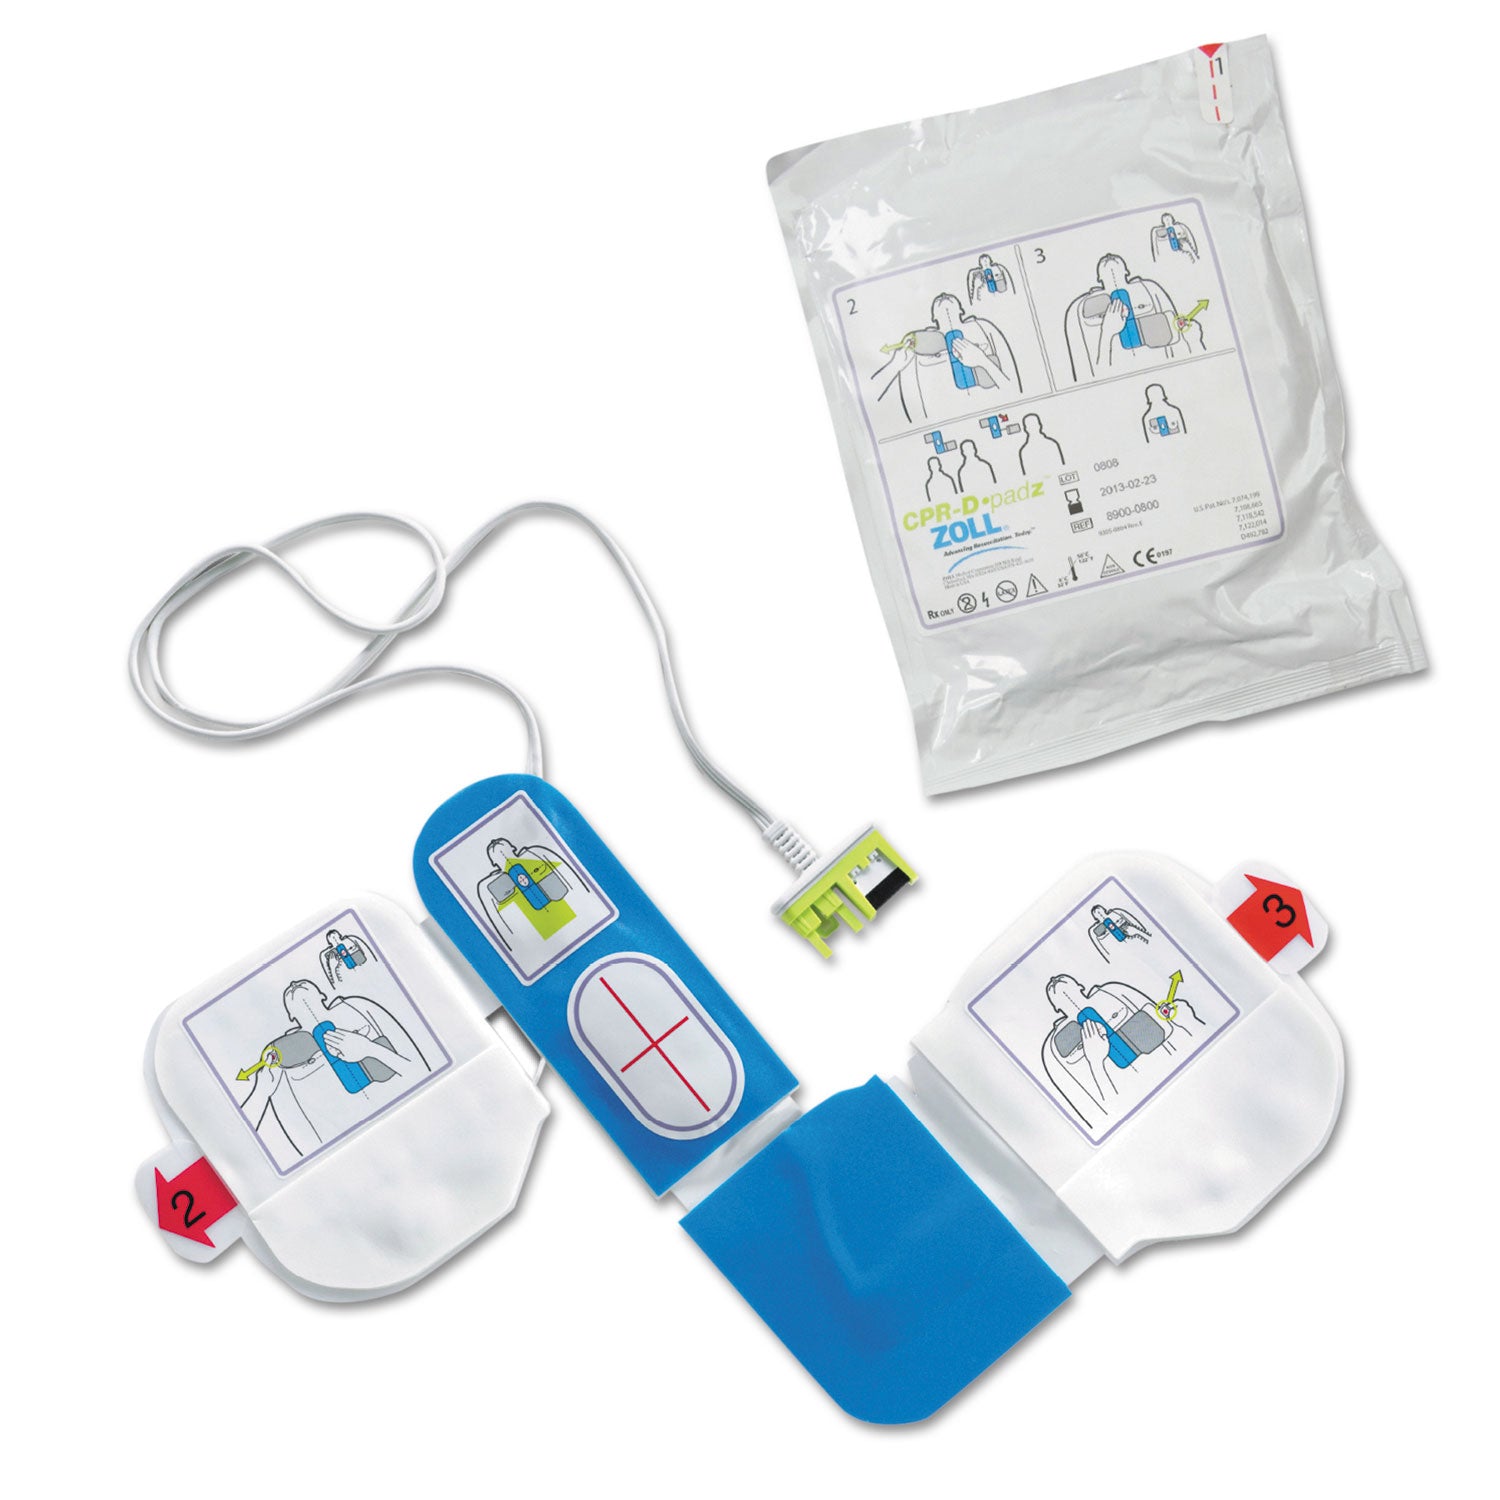 cpr-d-padz-adult-electrodes-5-year-shelf-life_zol8900080001 - 1